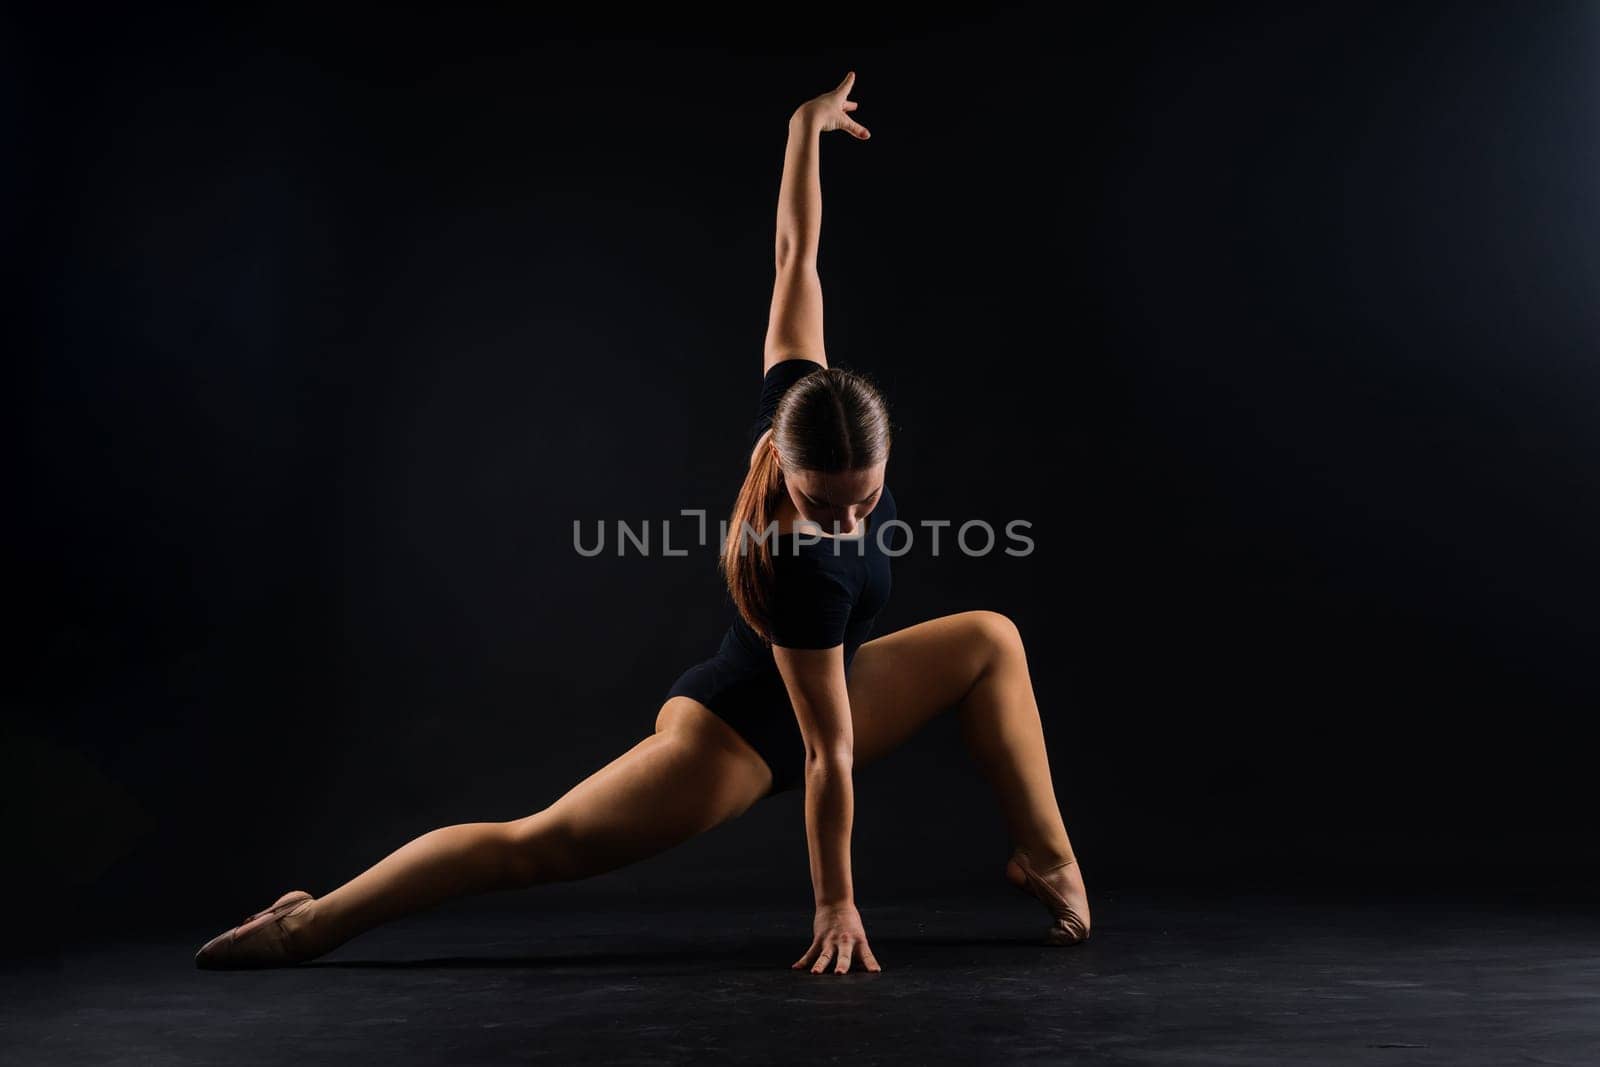 Beautiful cool young fit gymnast woman in a sportswear dress working out, performing art gymnastics